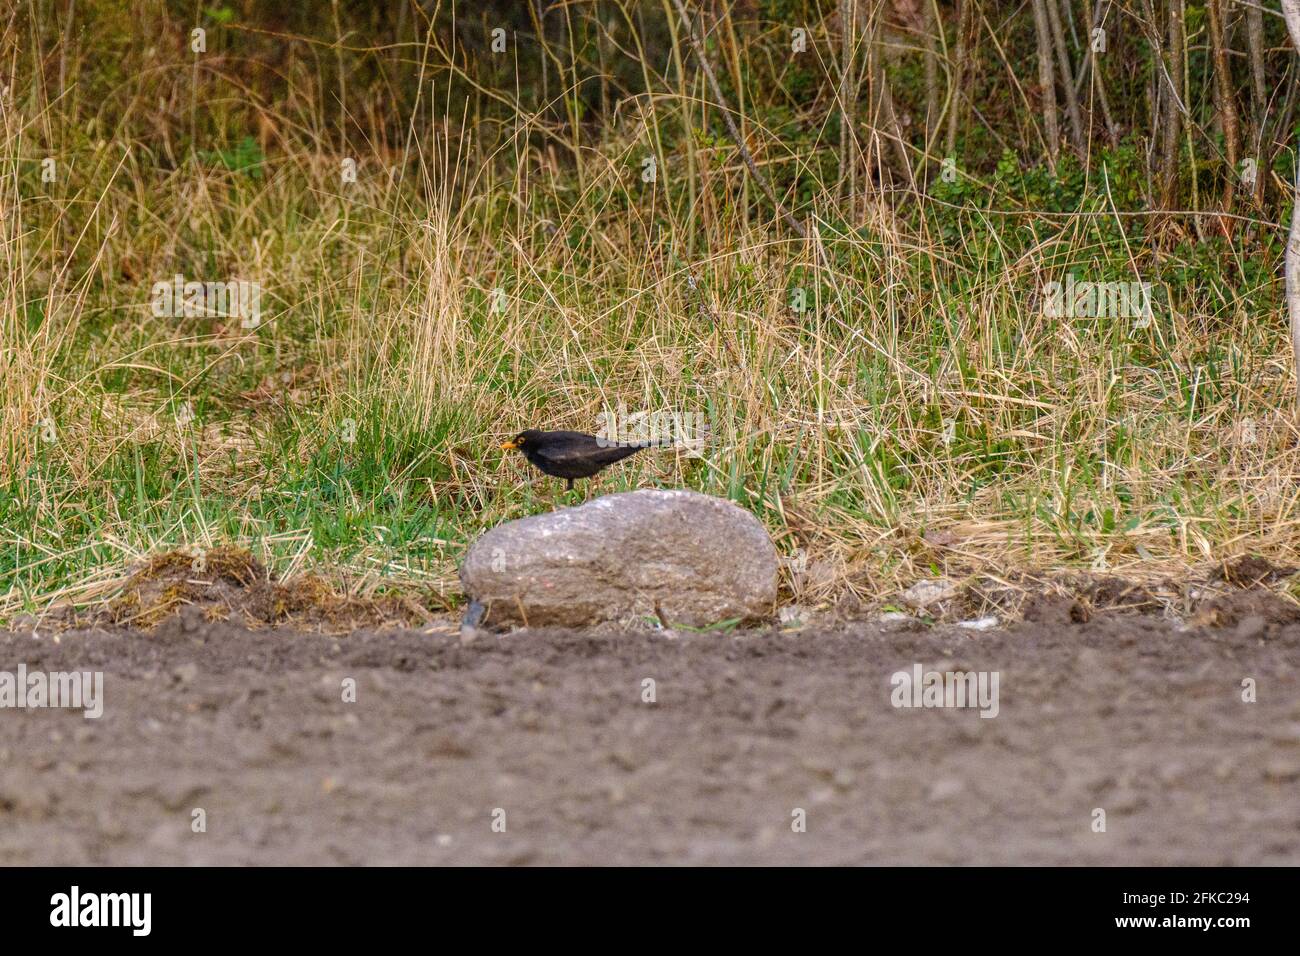 The common starling or European starling (Sturnus vulgaris) feeding in the green field and tree branches Stock Photo